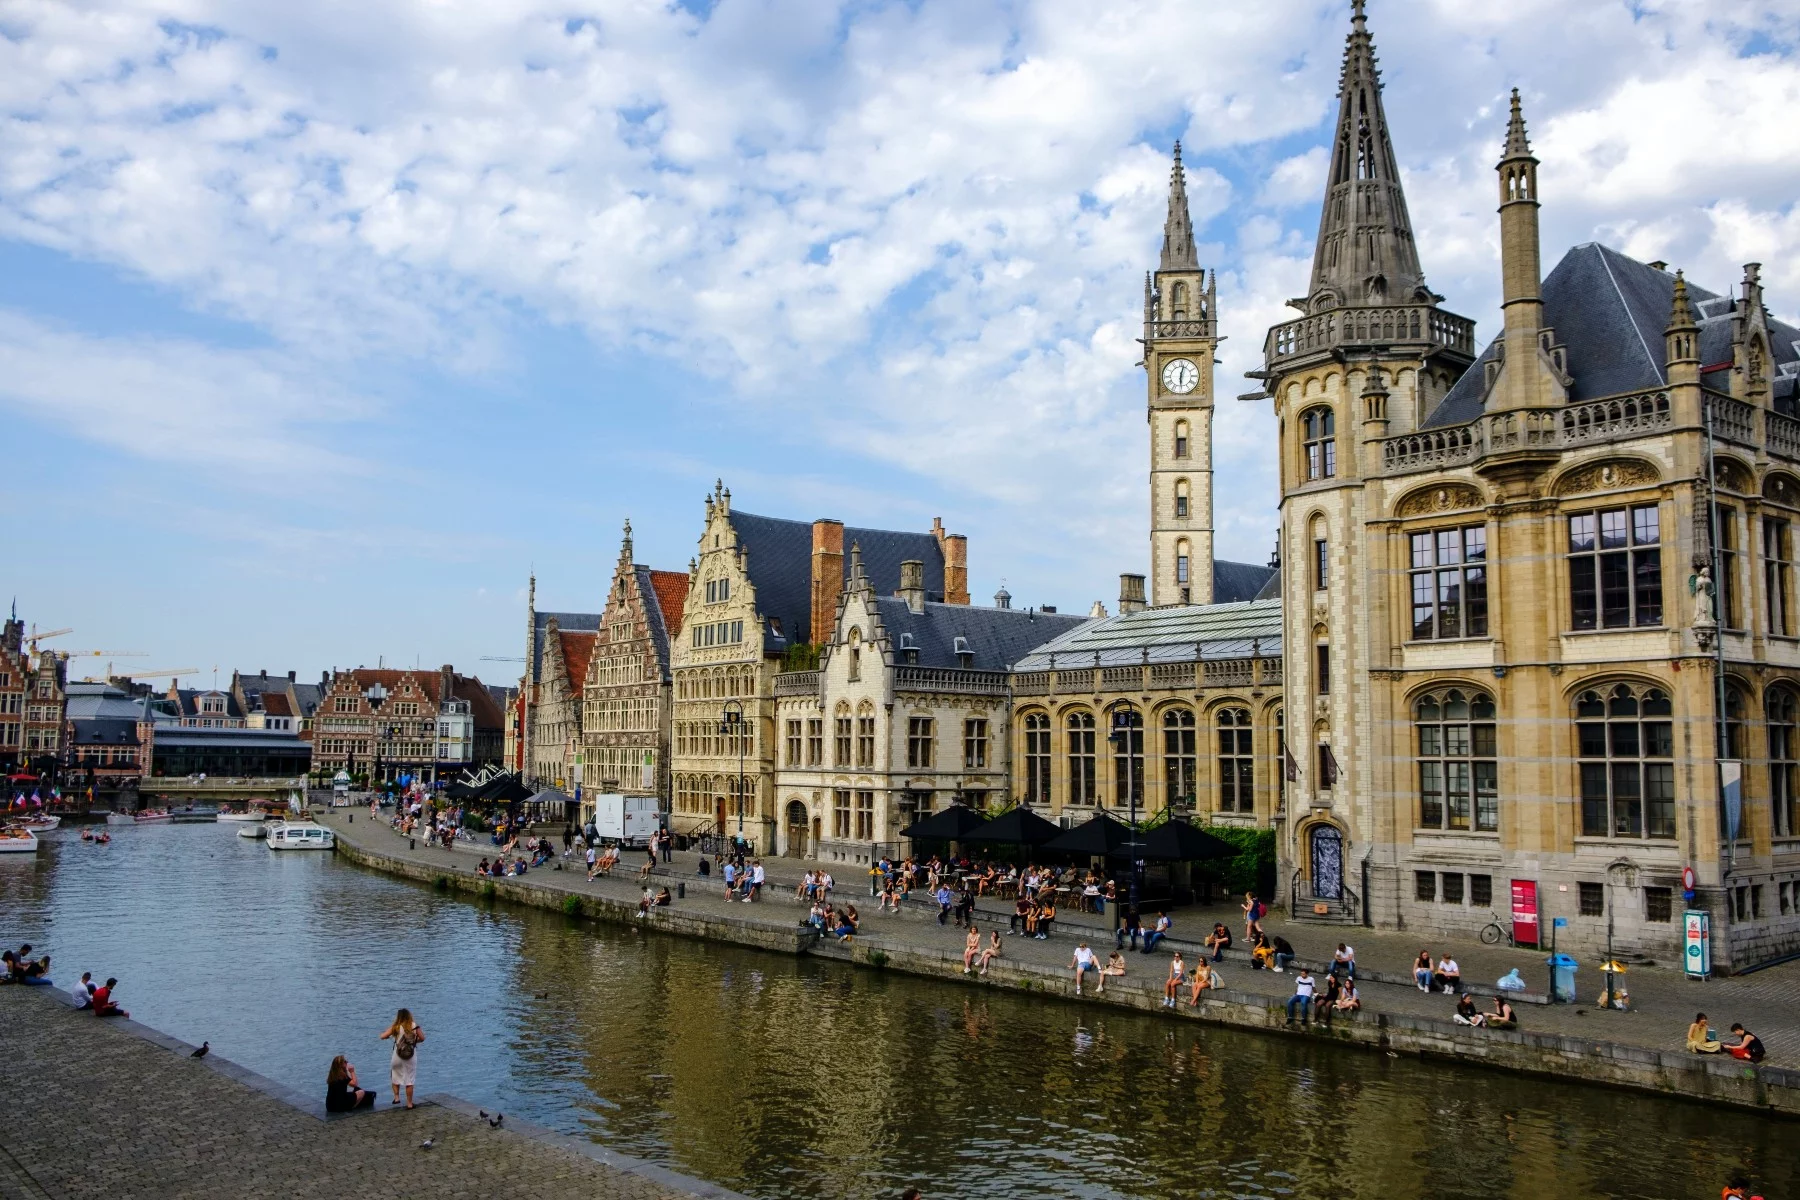 Residents sitting along the canal in Ghent, Belgium.